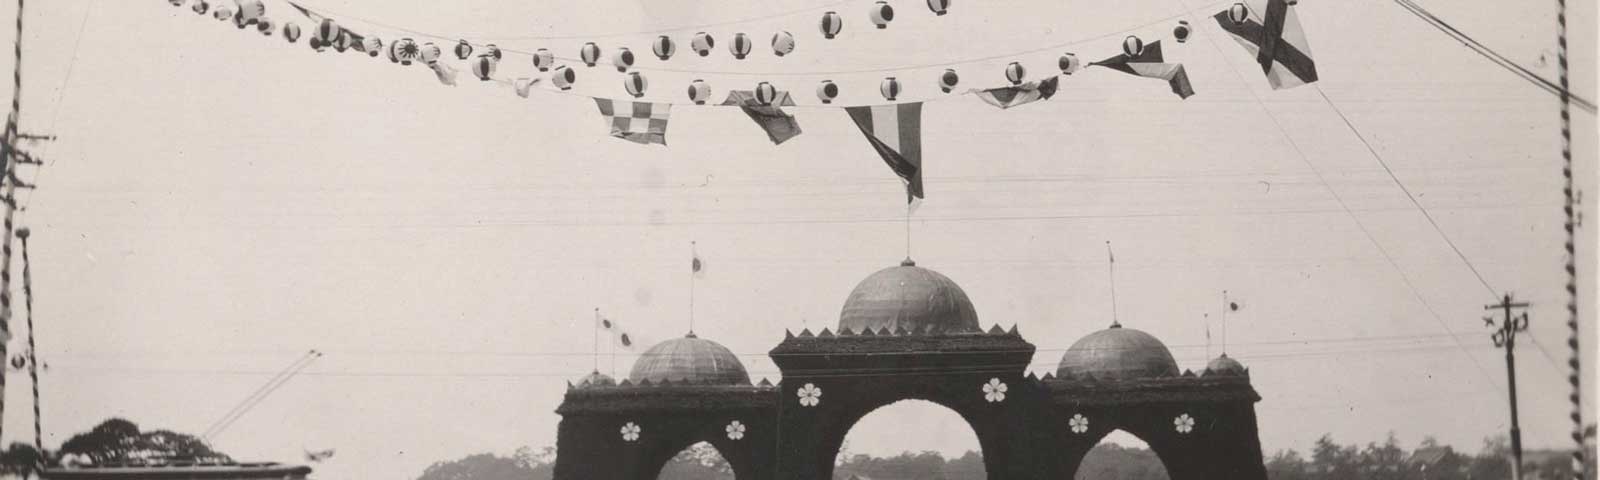 black and white photo of a building and flags and lanterns overhead